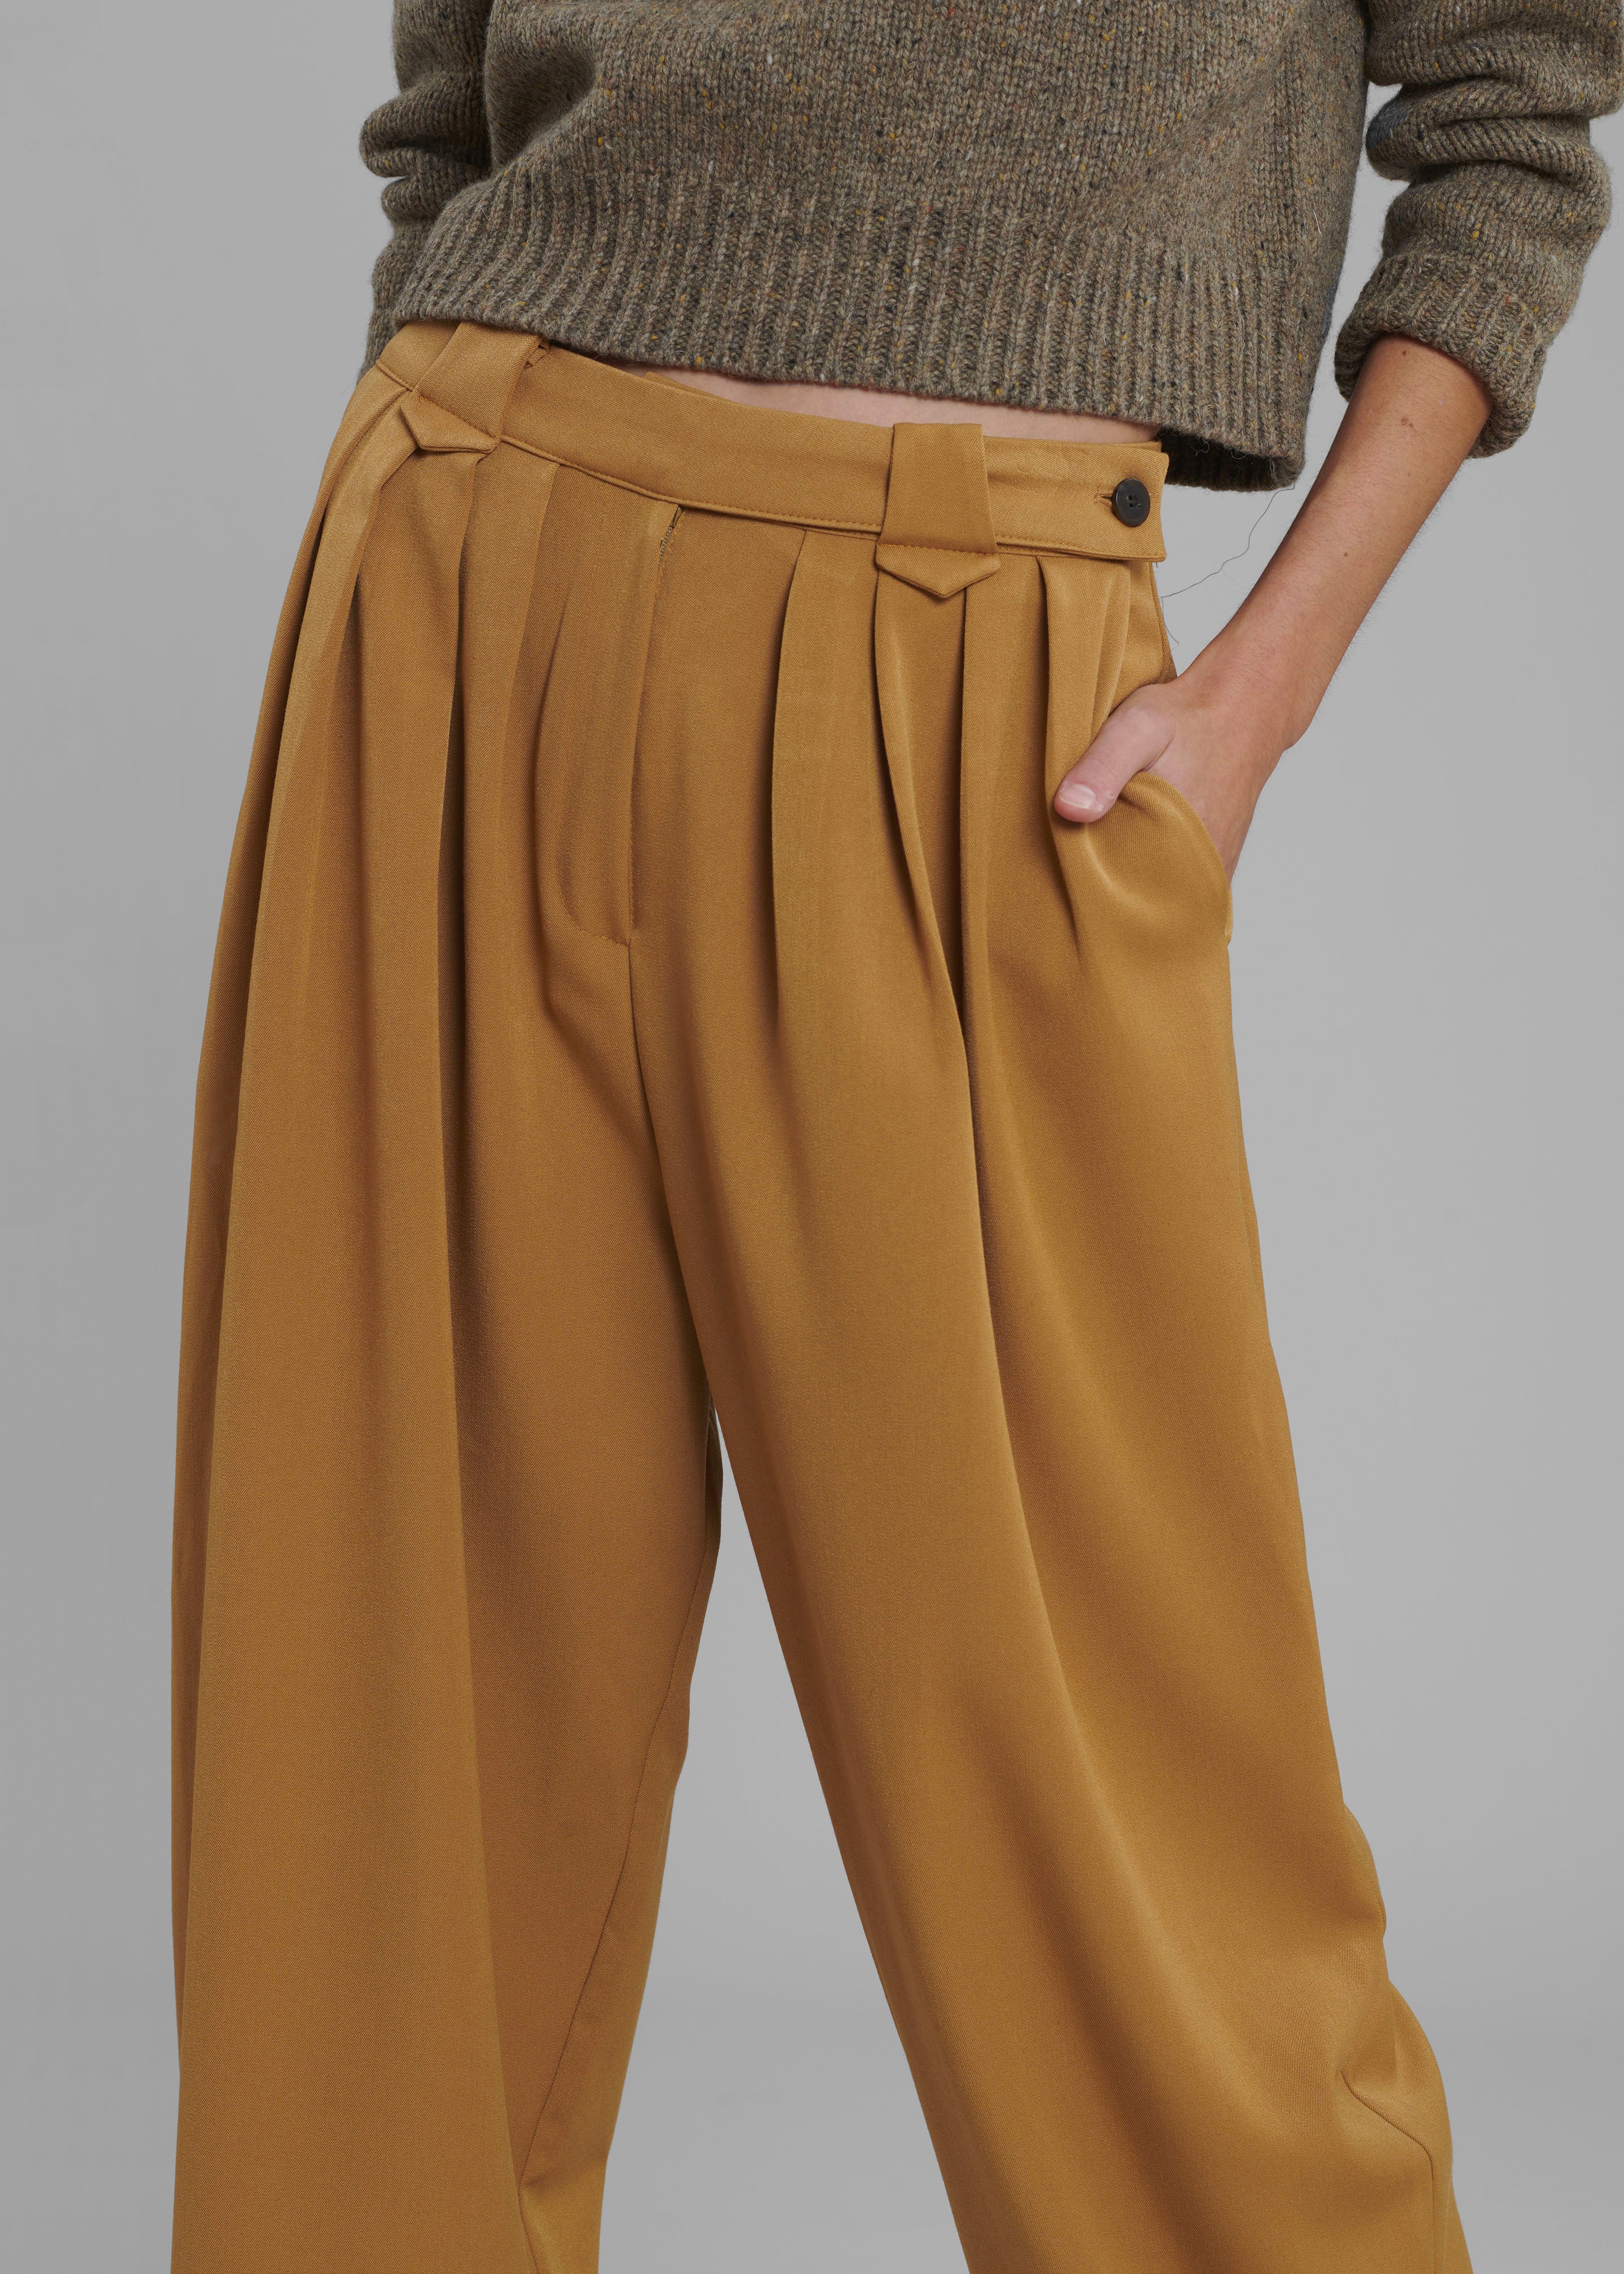 Luce Pleated Pants - Ginger